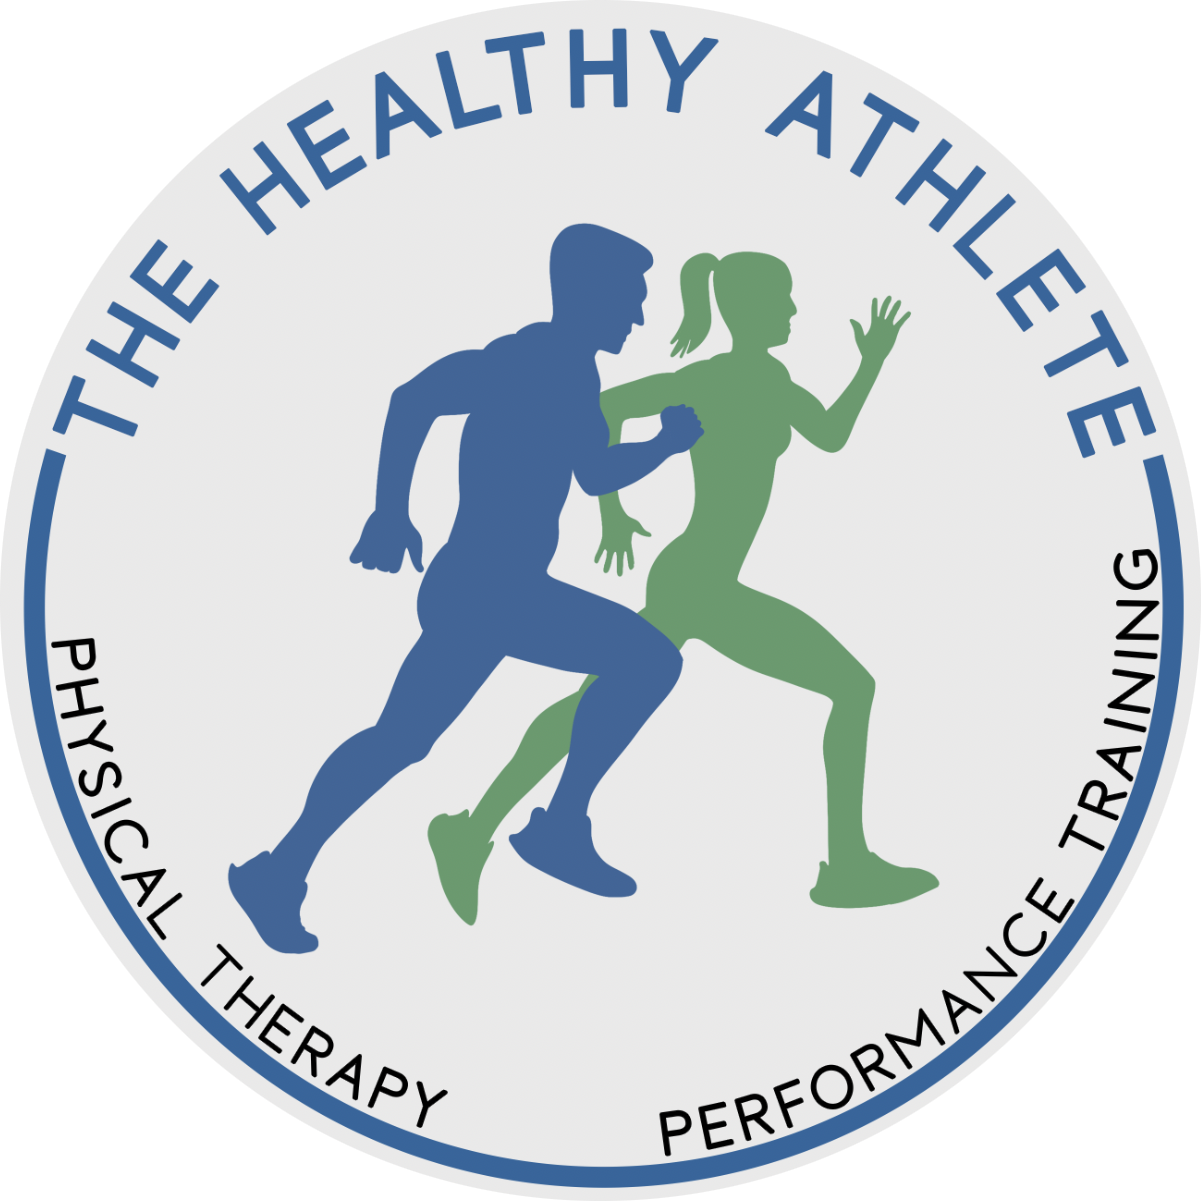 THE HEALTHY ATHLETE PT